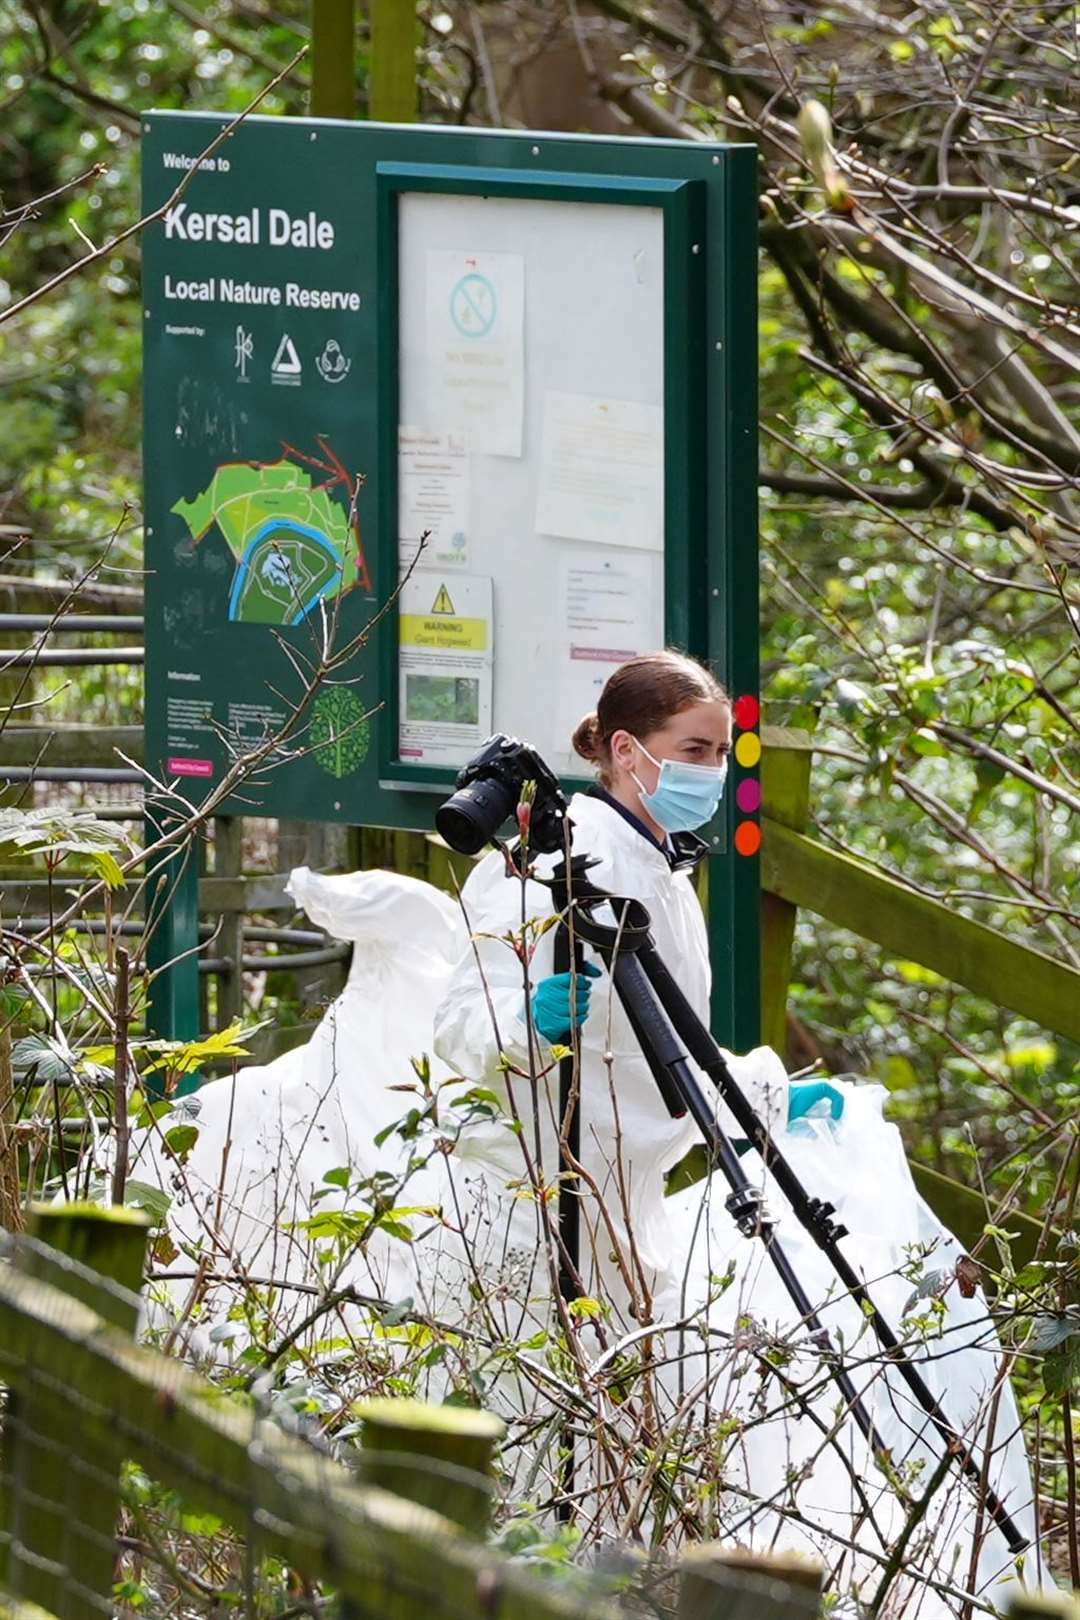 Forensic officers at Kersal Dale, near Salford (Peter Byrne/PA)